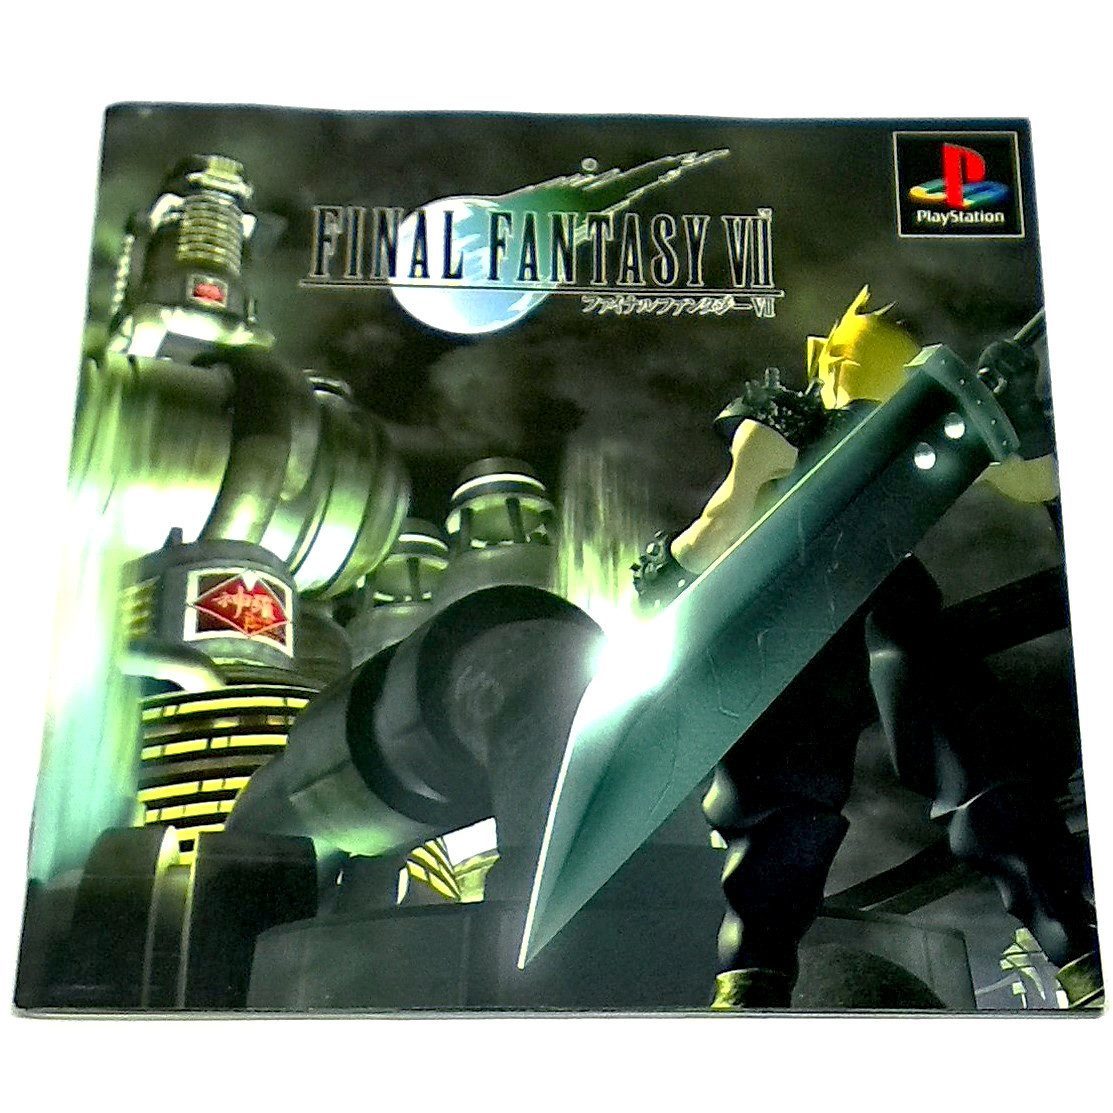 Final Fantasy VII for PlayStation (import) - Front of manual